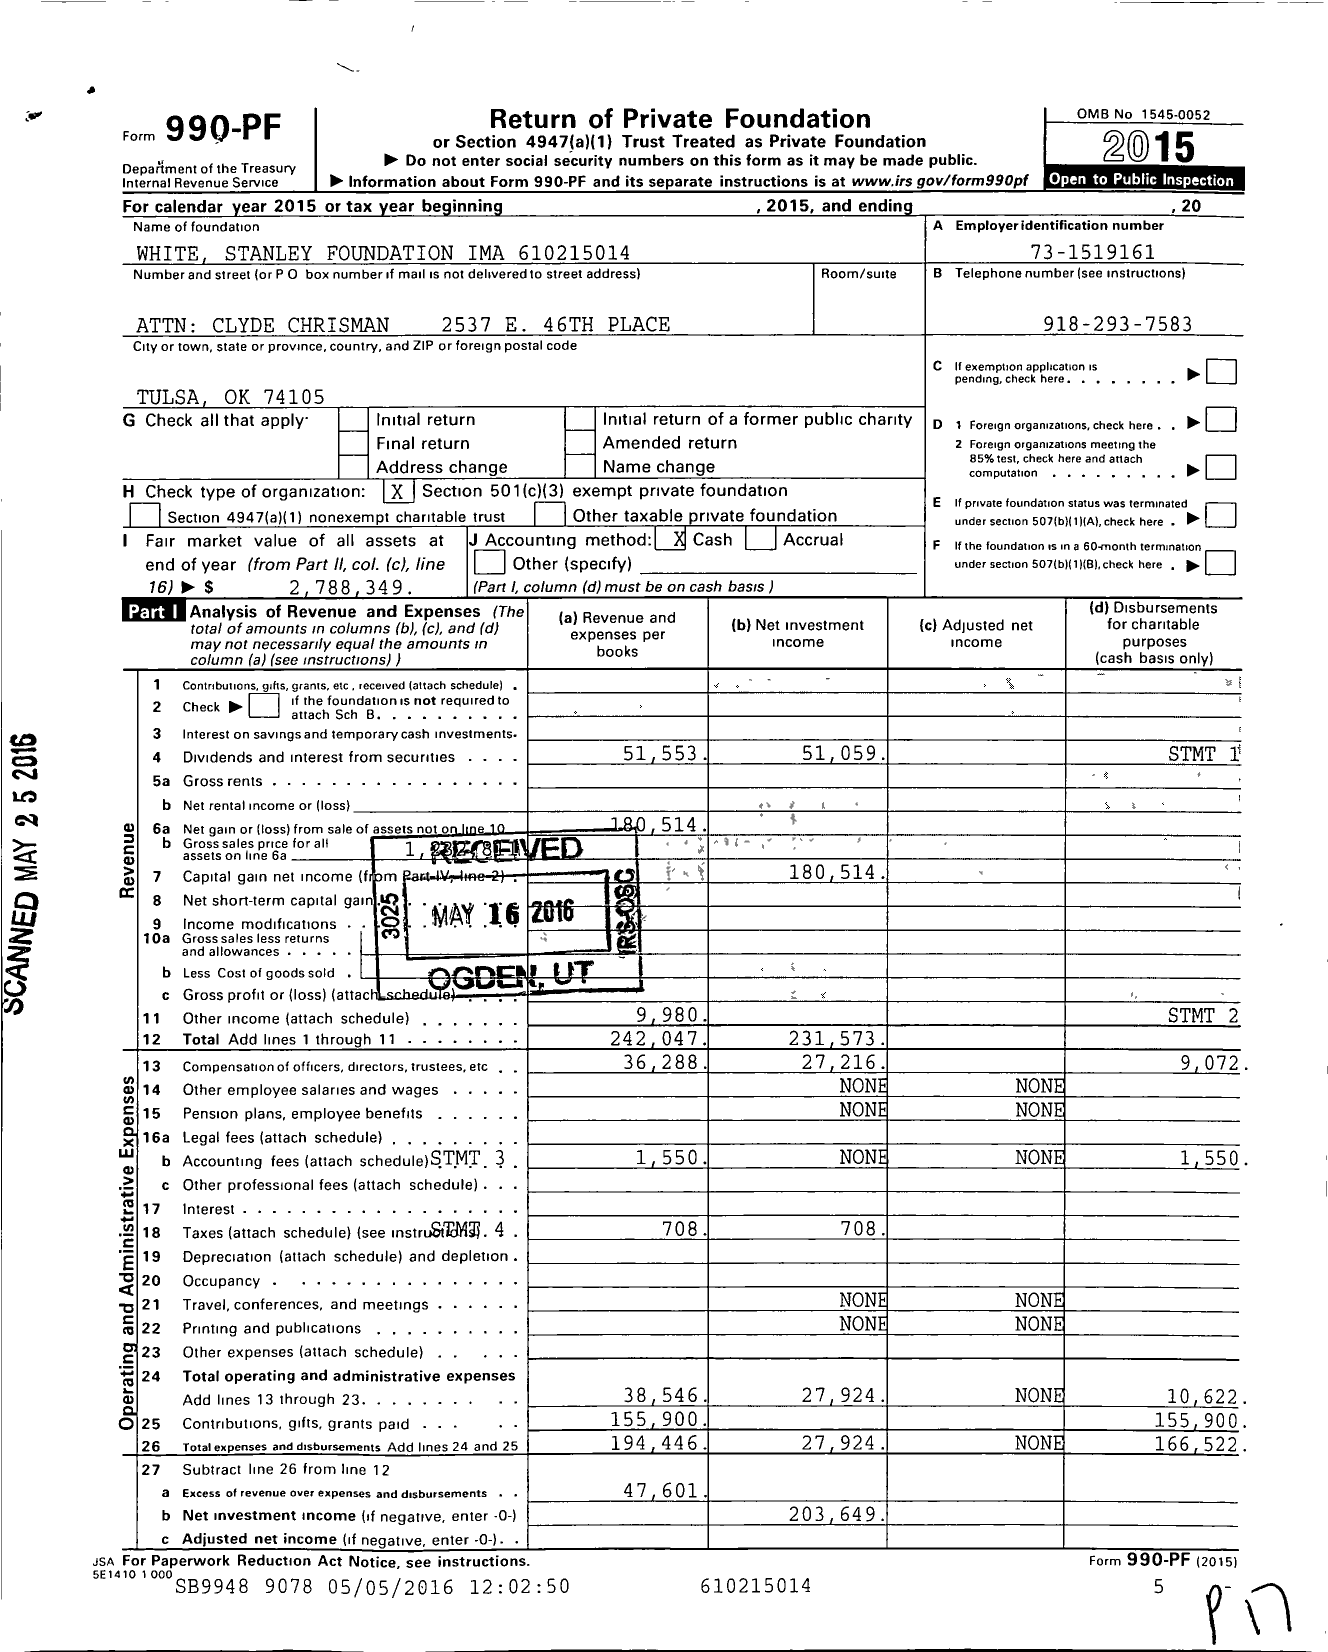 Image of first page of 2015 Form 990PF for White Stanley Foundation Ima 9231-01-04